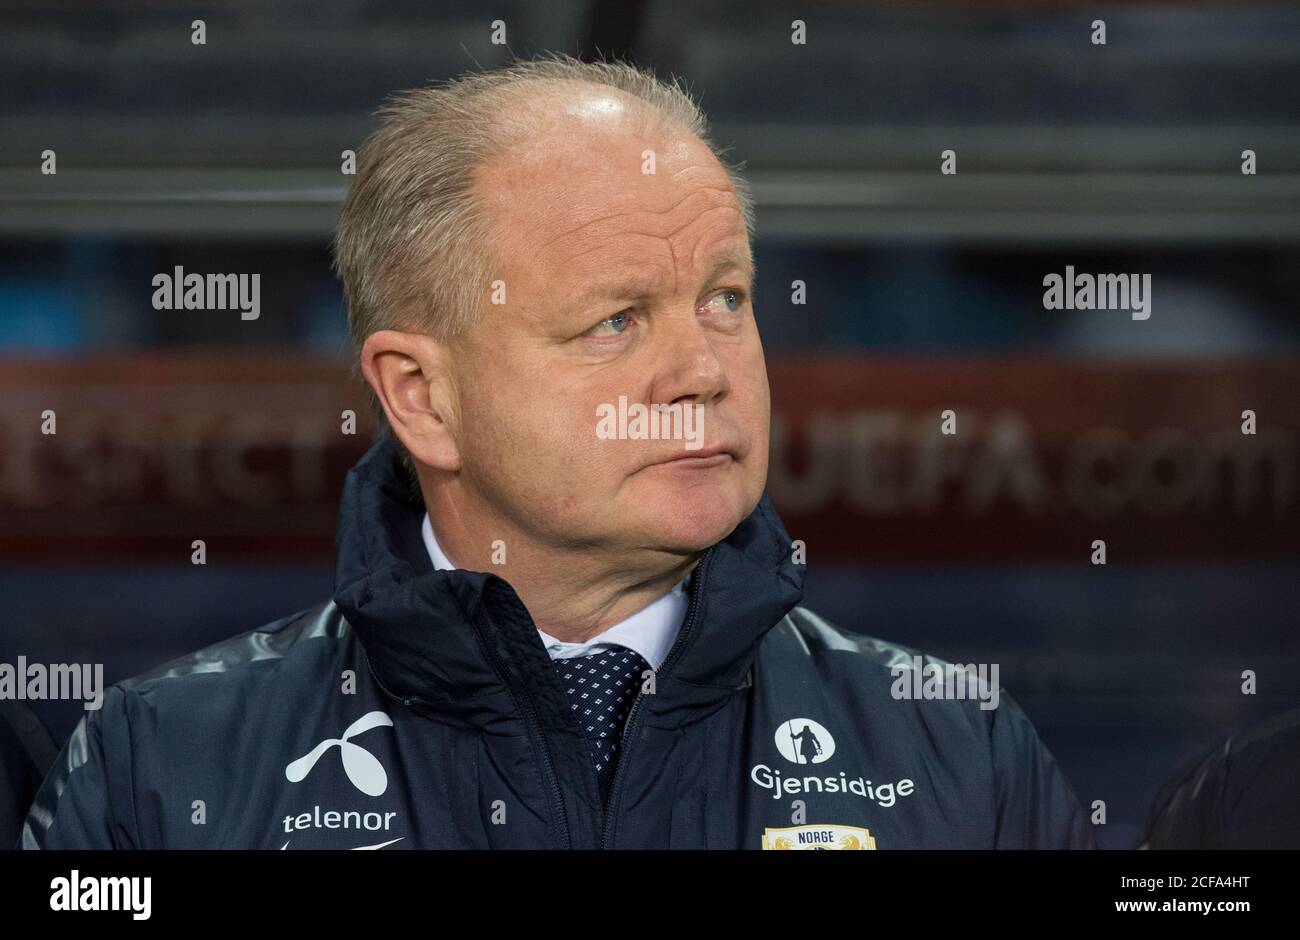 The Norwegian team manager Per-Mathias Høgmo seen at the sideline during the UEFA Euro 2016 play-off match between Norway and Hungary at Ullevaal in Oslo (Gonzales Photo/Jan-Erik Eriksen). Stock Photo